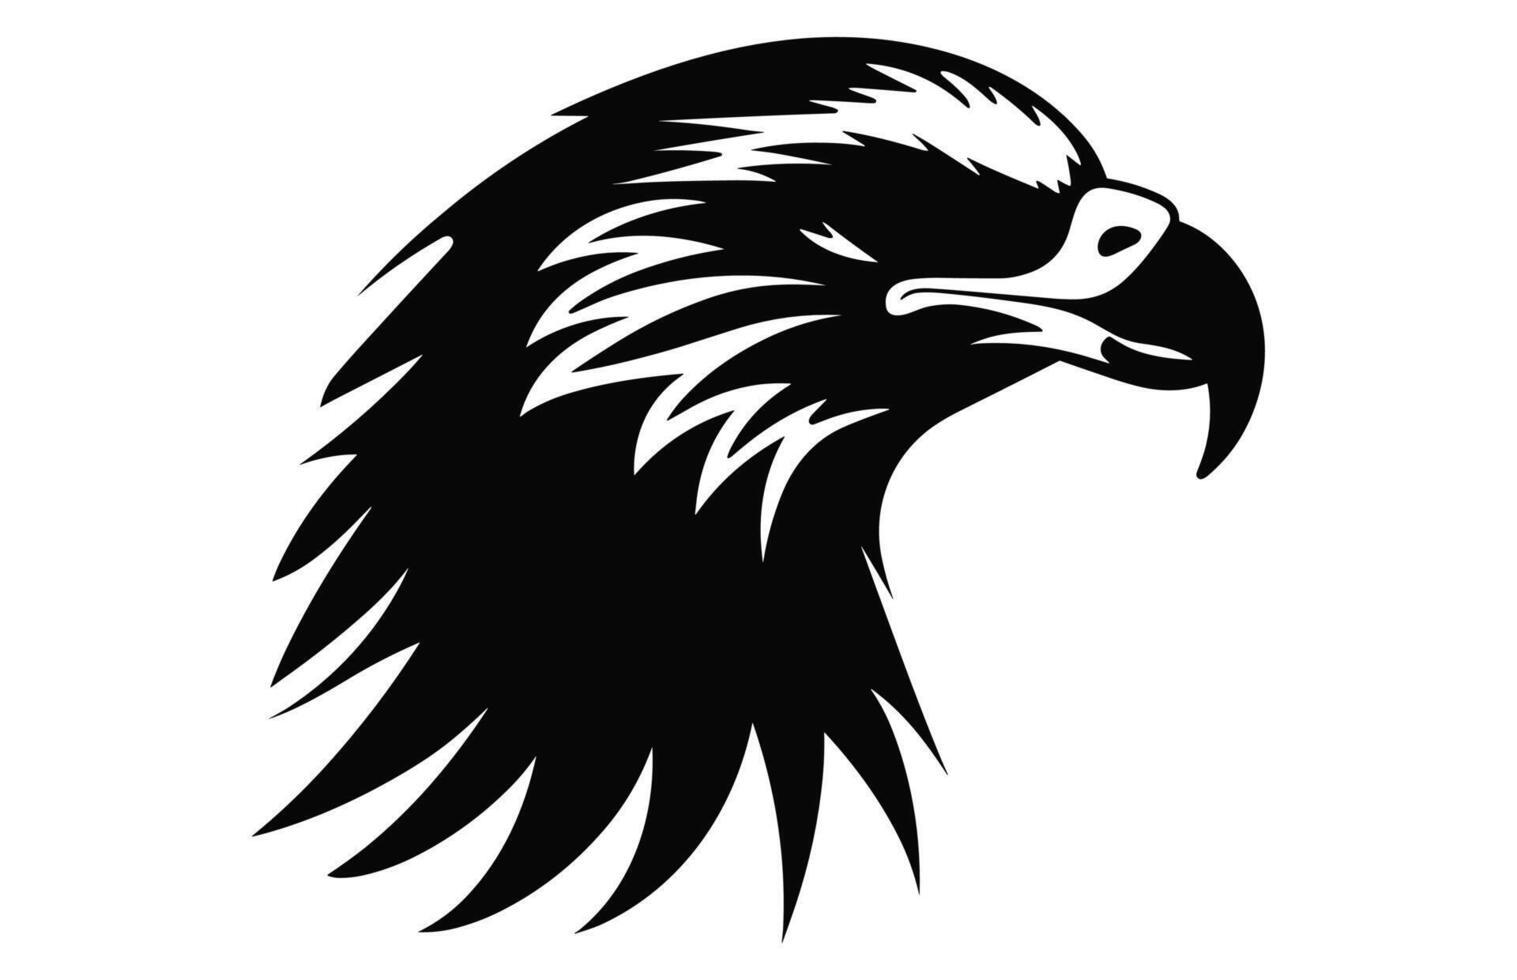 Bald Eagle Head Silhouette Vector, Eagle face black Clipart isolated on a white background vector